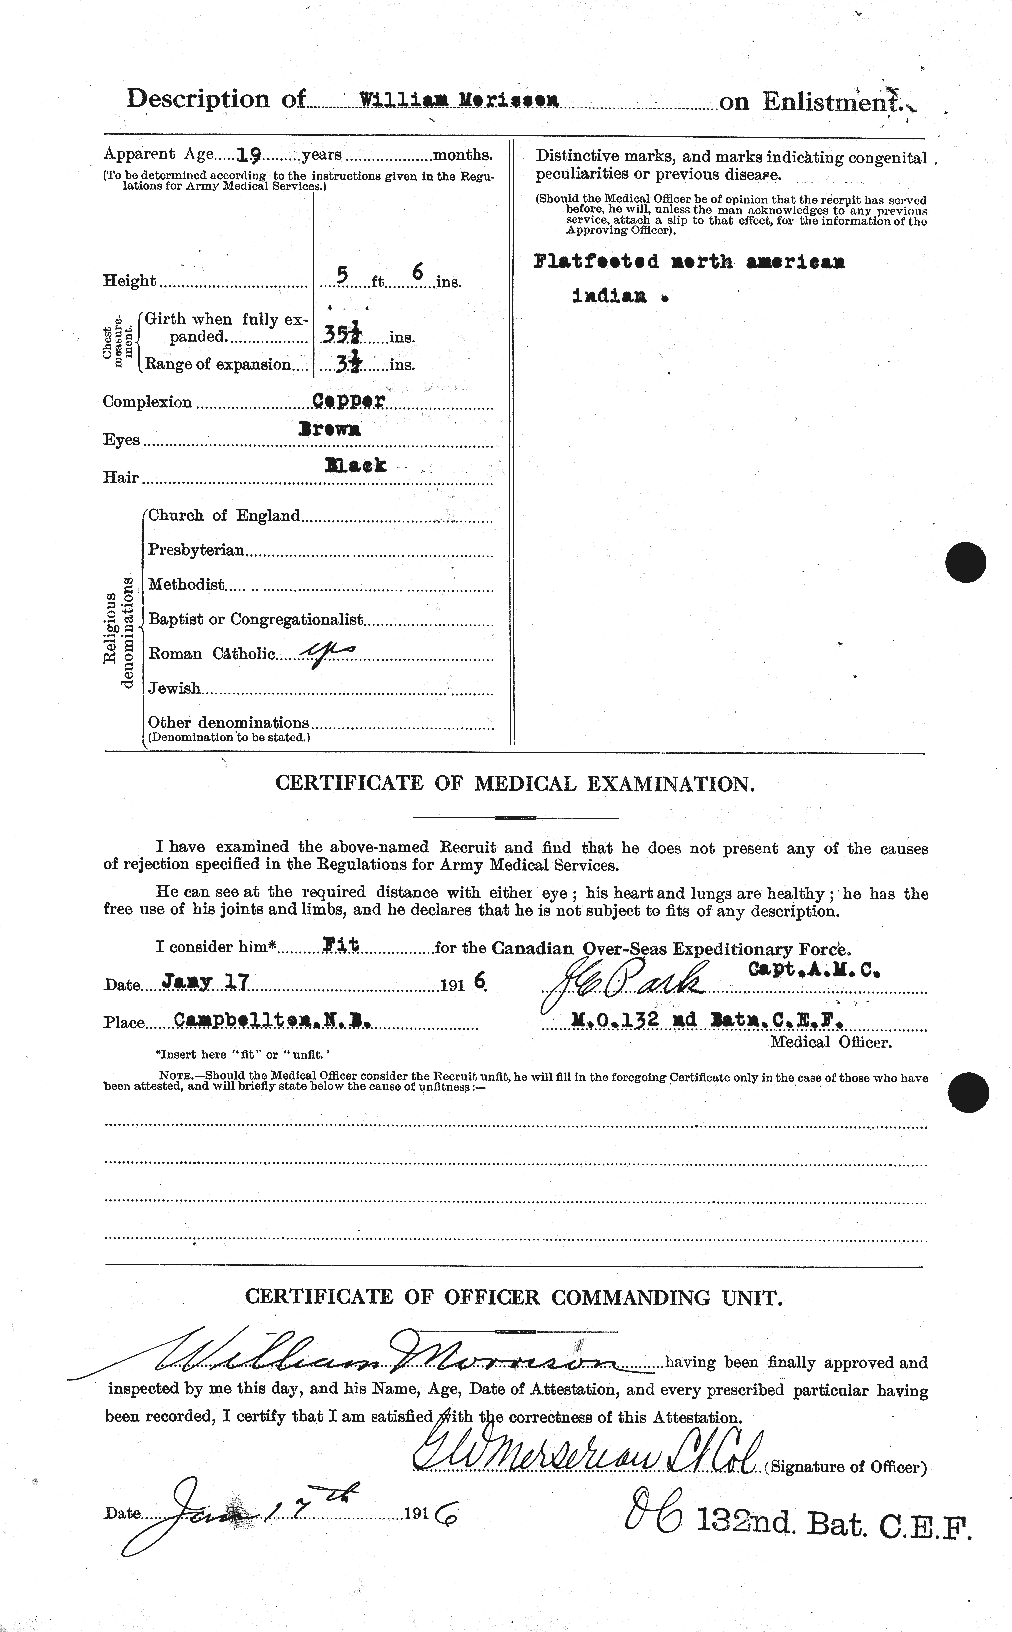 Personnel Records of the First World War - CEF 509237b